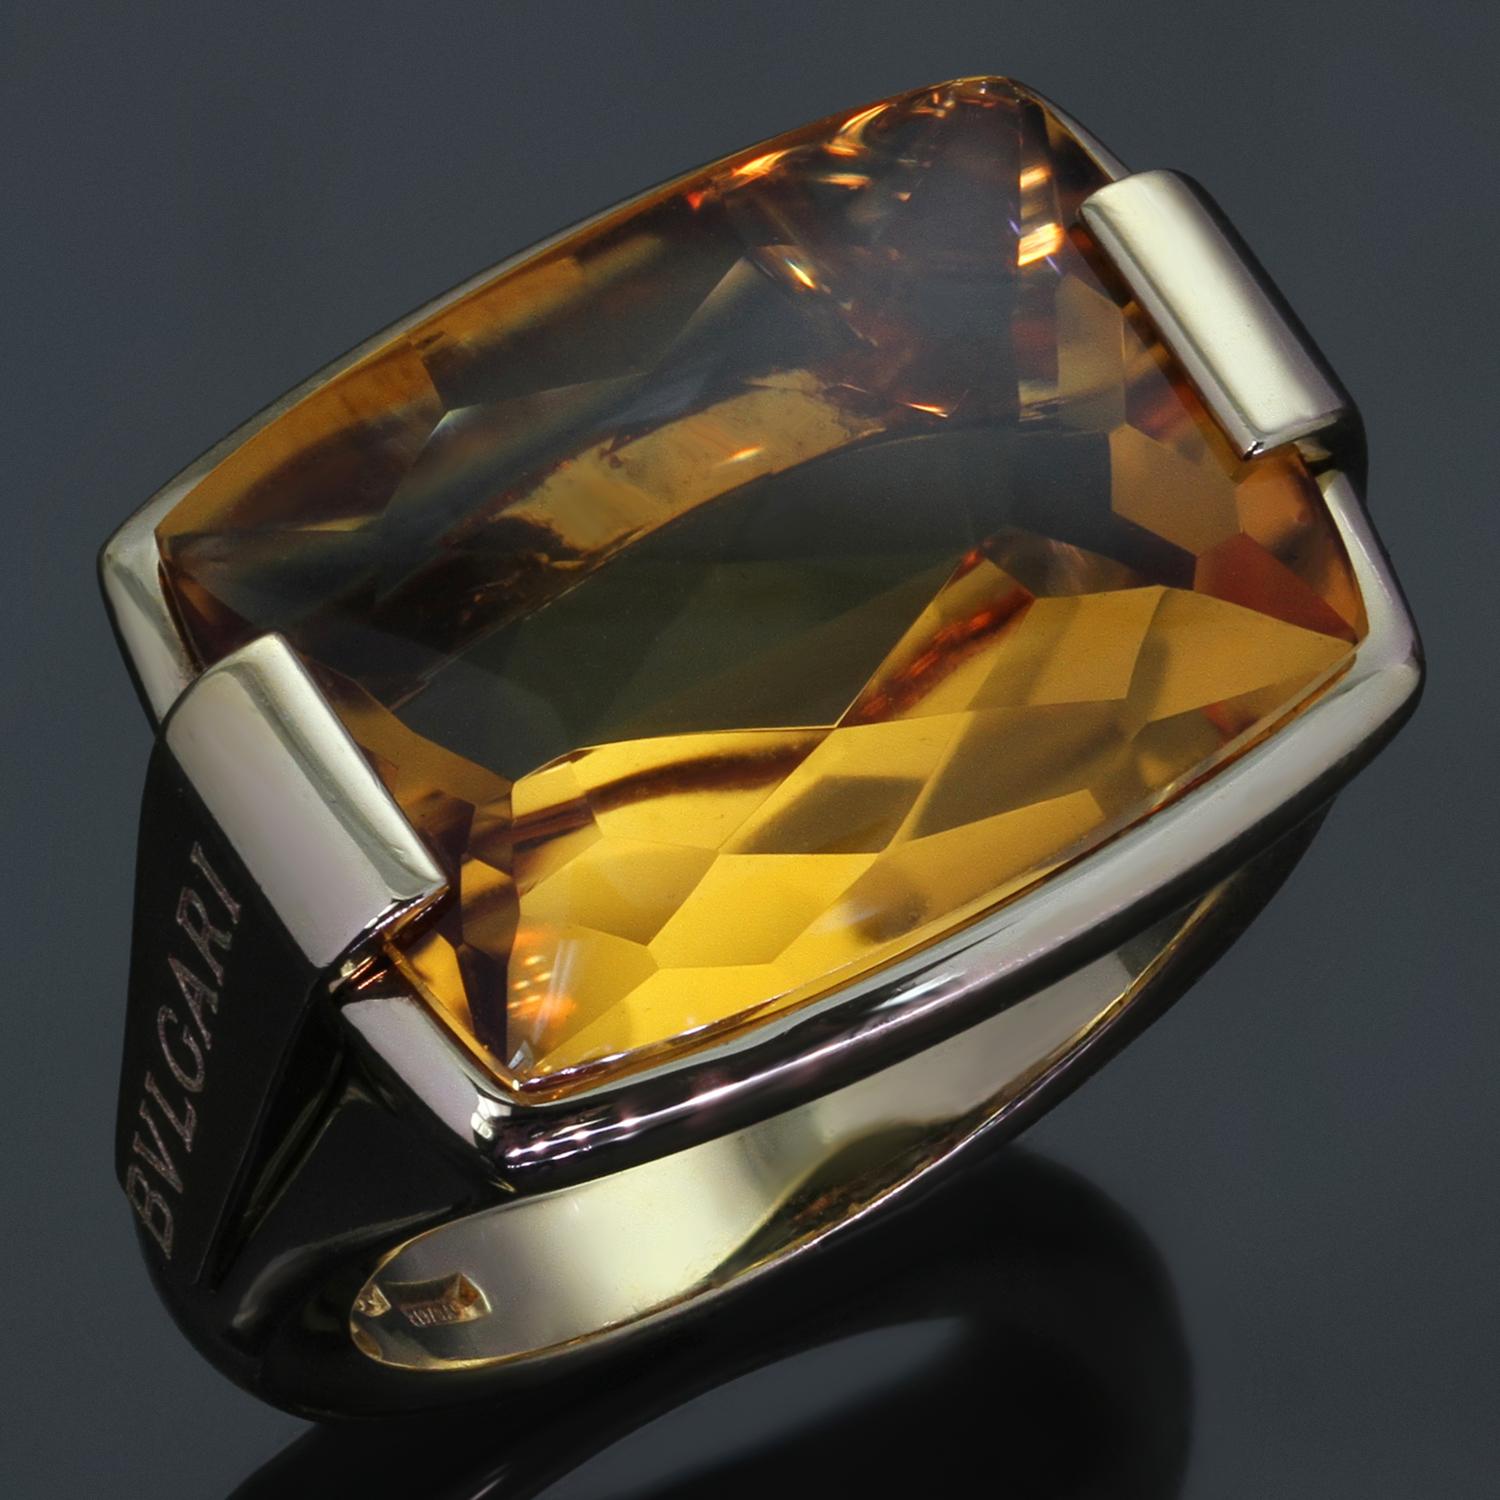 This gorgeous Bulgari ring from the chic Groovy Metropolis colletion is crafted in 18k yellow gold, inscribed with the Bvlgari logo on the sides and set with a faceted rectangular citrine. Made in Italy circa 1990s. Measurements: 0.78